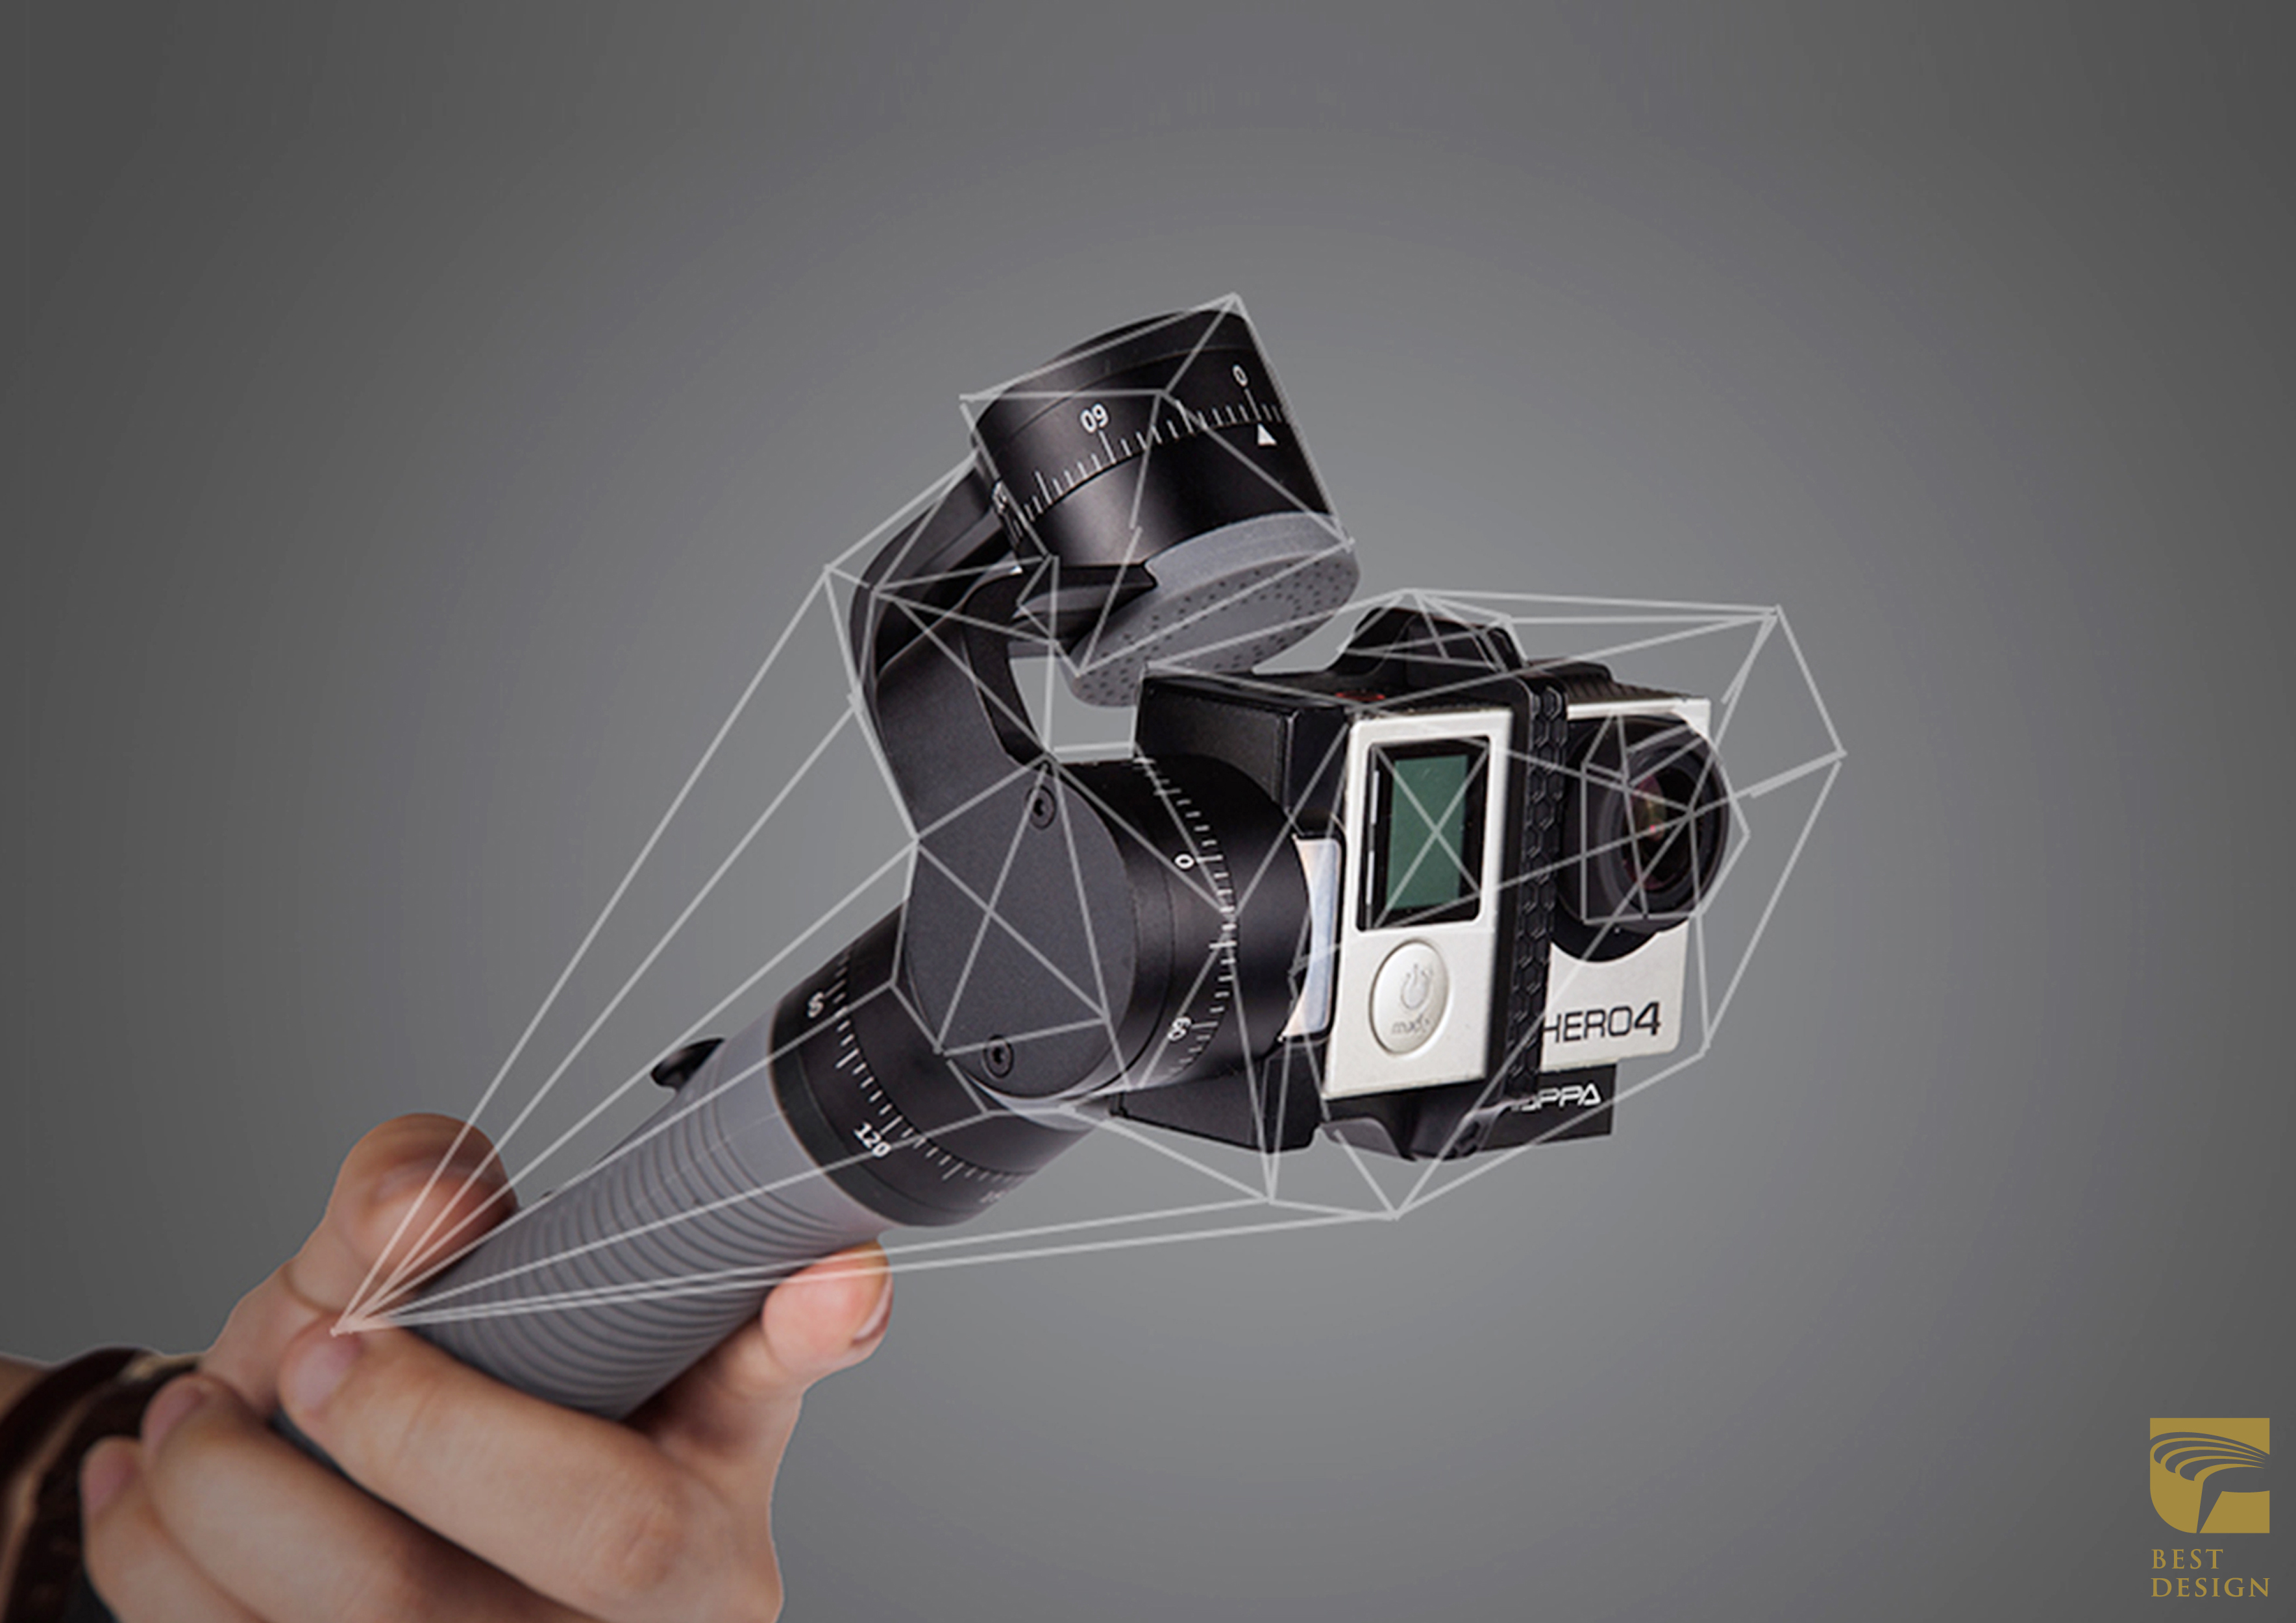 Handheld 3-Axis Camera Gimbal Stabilizer by april6th design Co. Ltd, Image courtesy of Golden Pin Design Awards